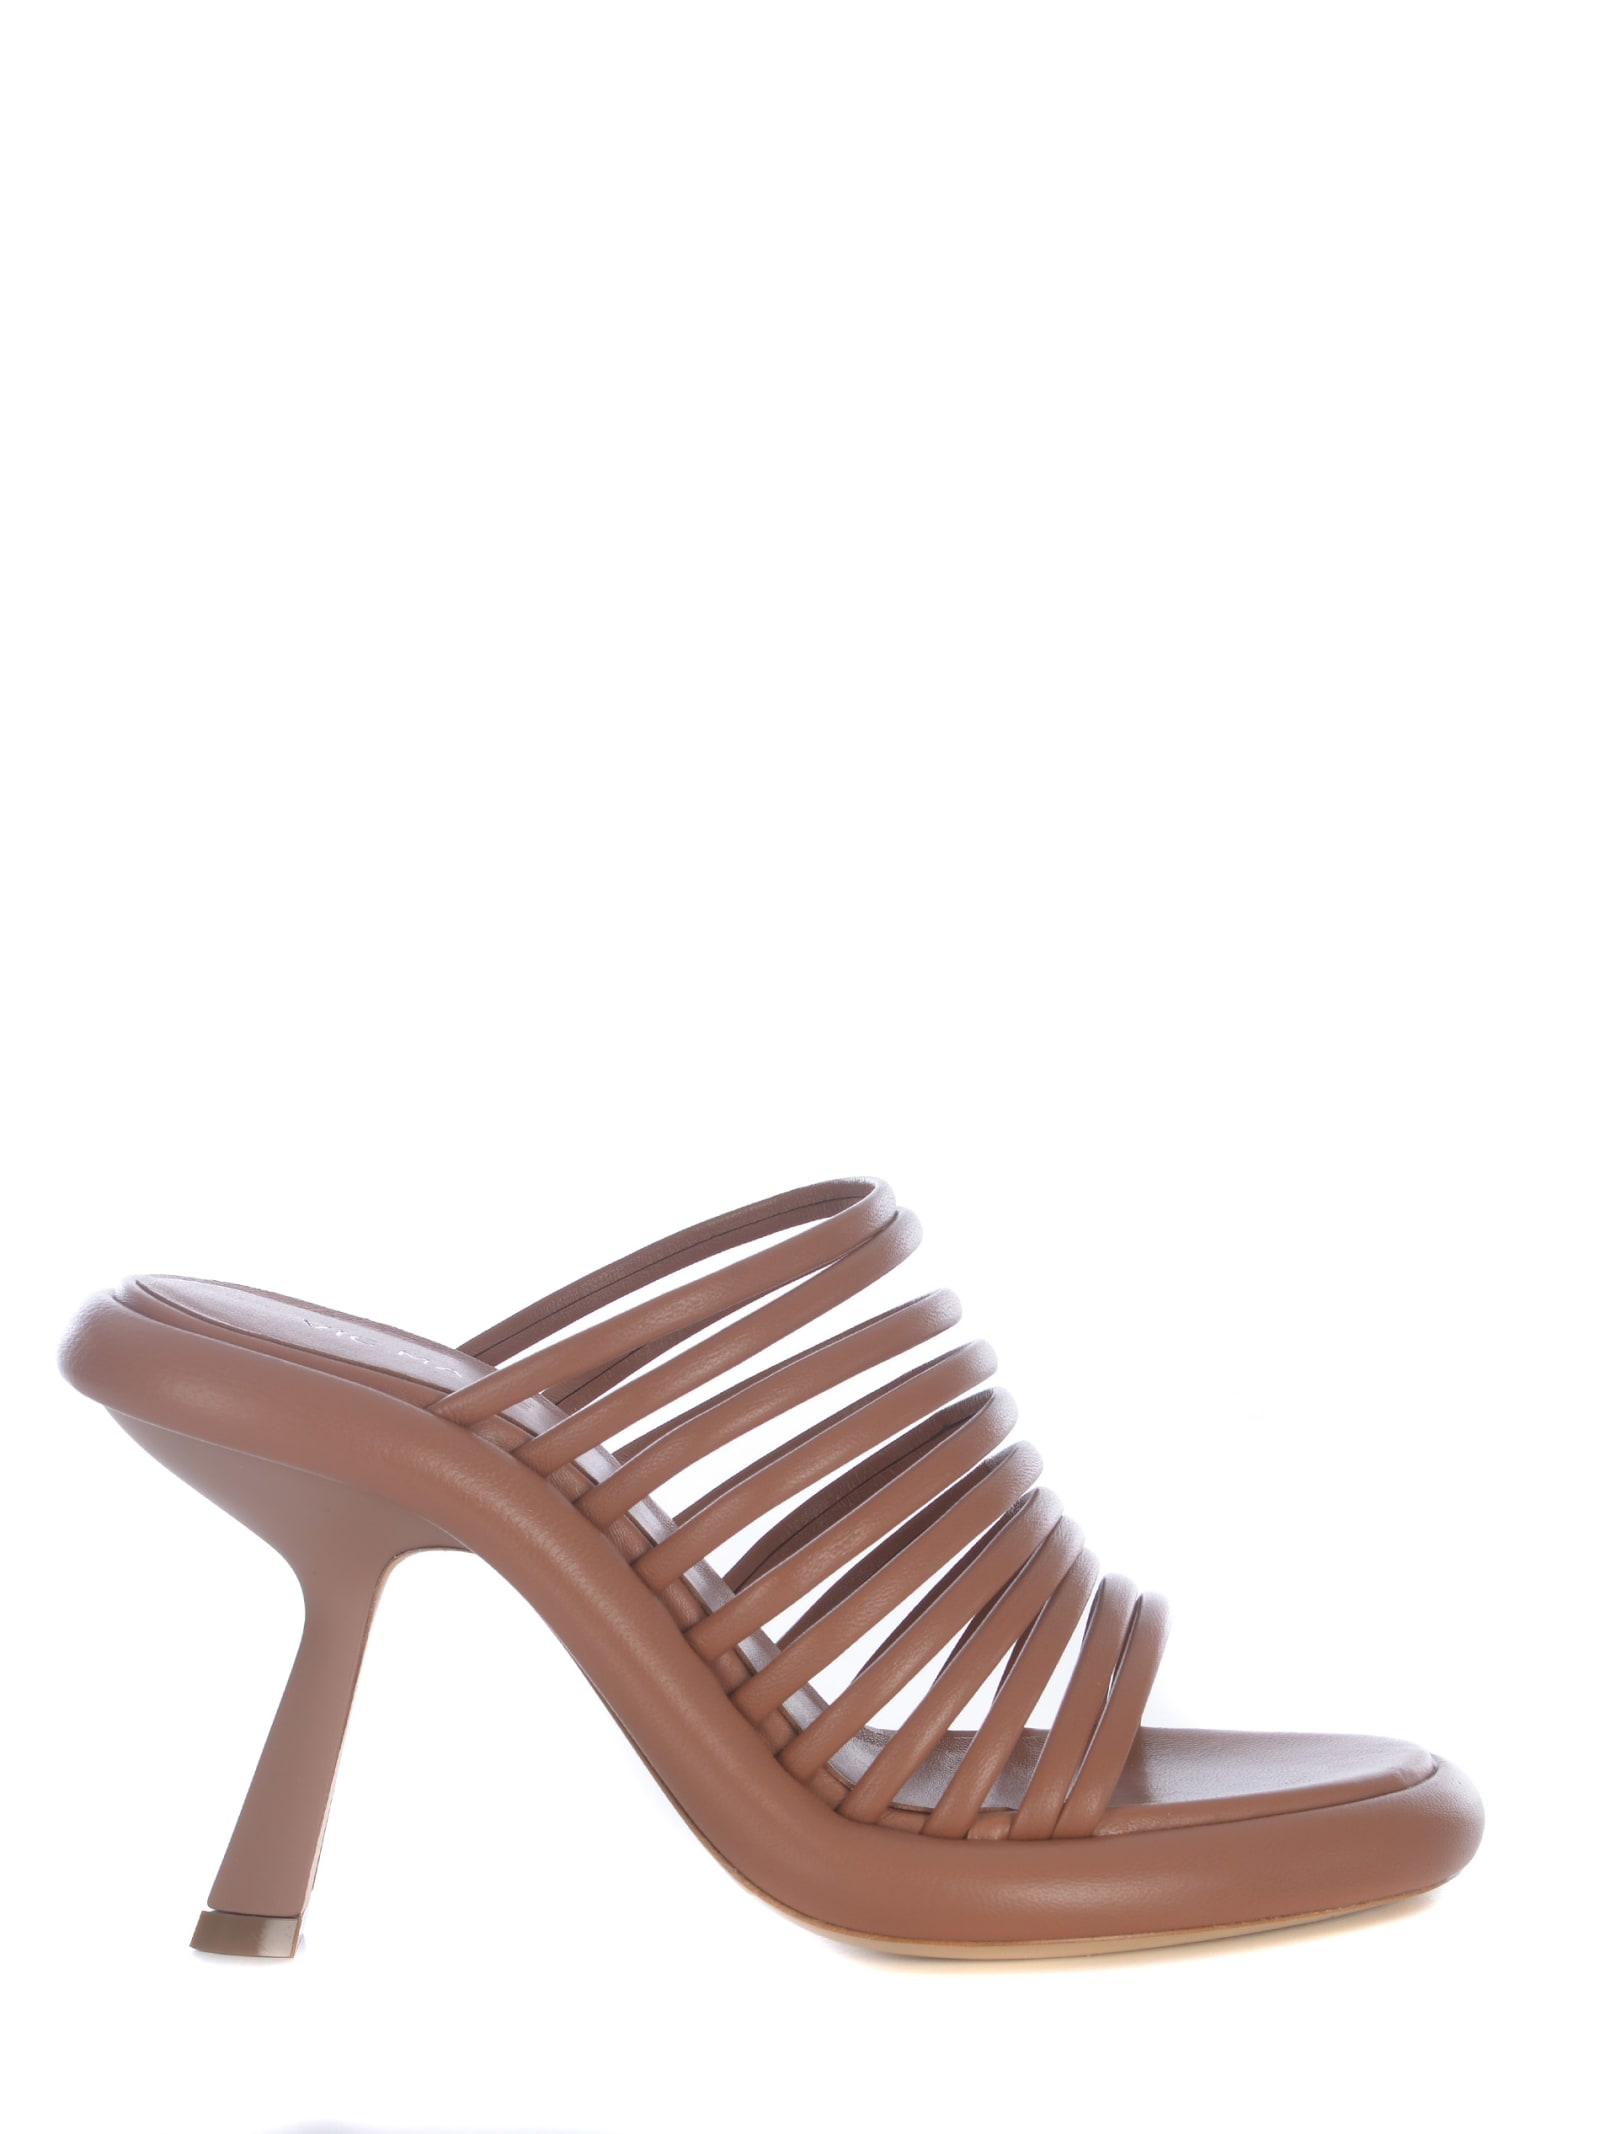 Shop Vic Matie Sandal Vic Matié Dosh Made Of Nappa In Cuoio